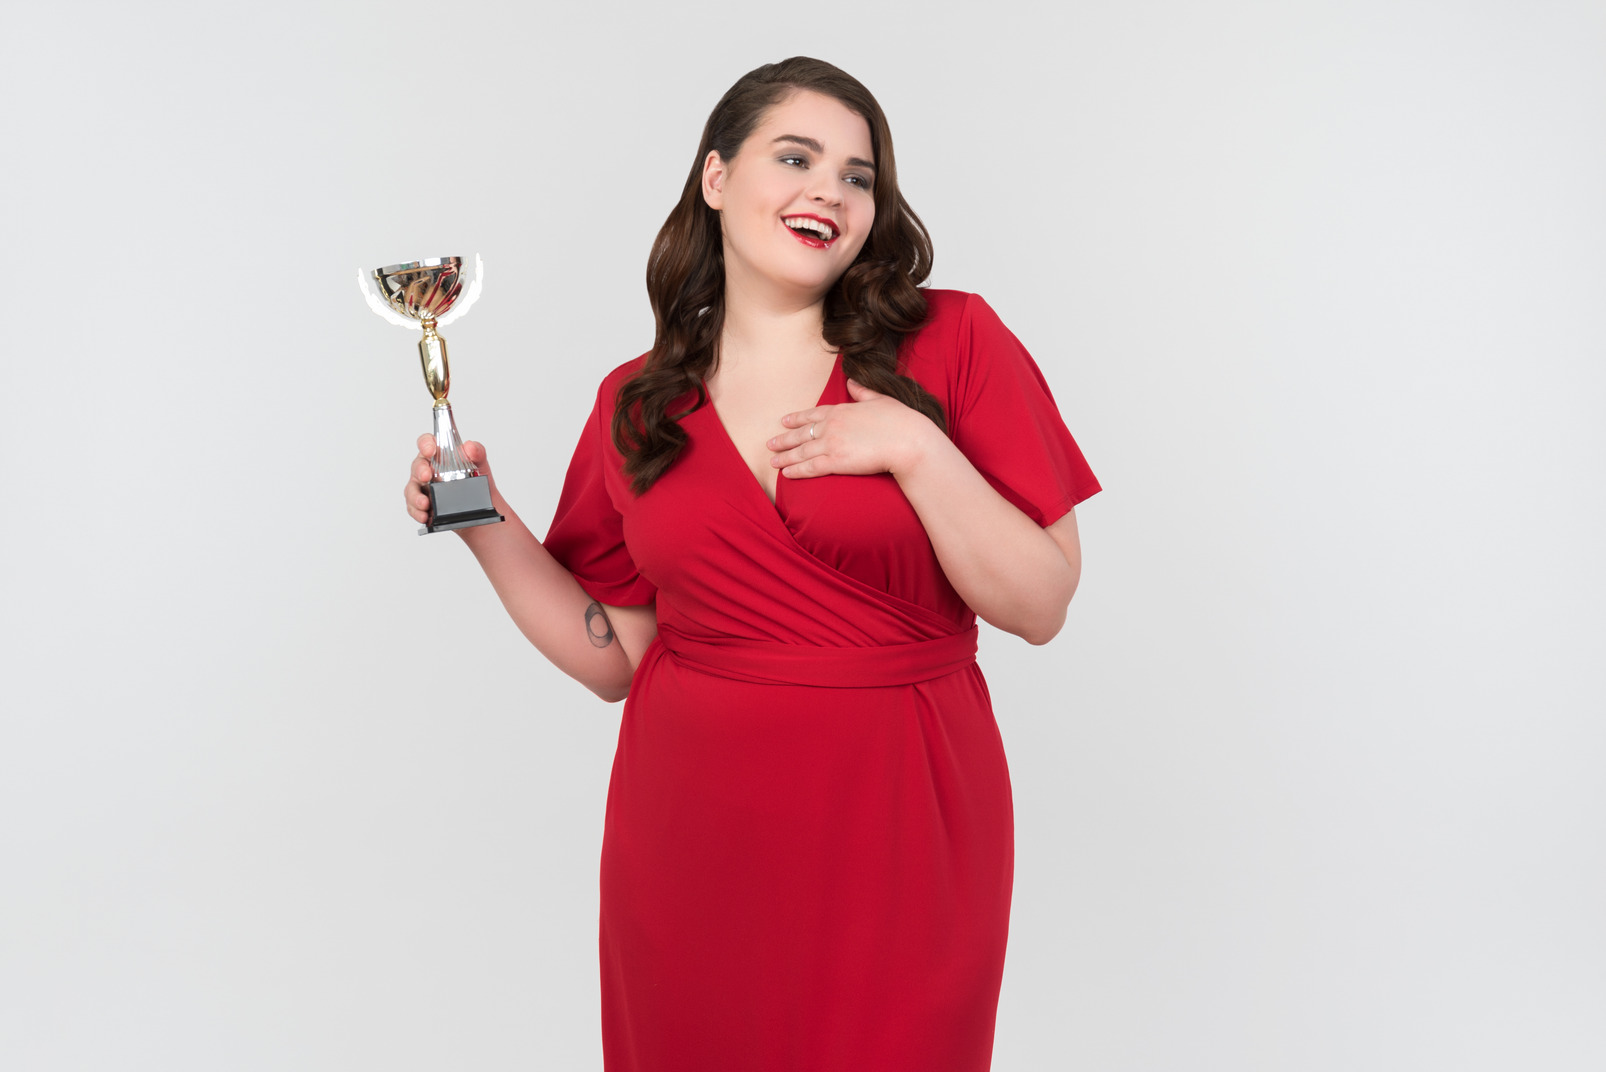 Smiling young plus-size model in red evening dress holding trophy